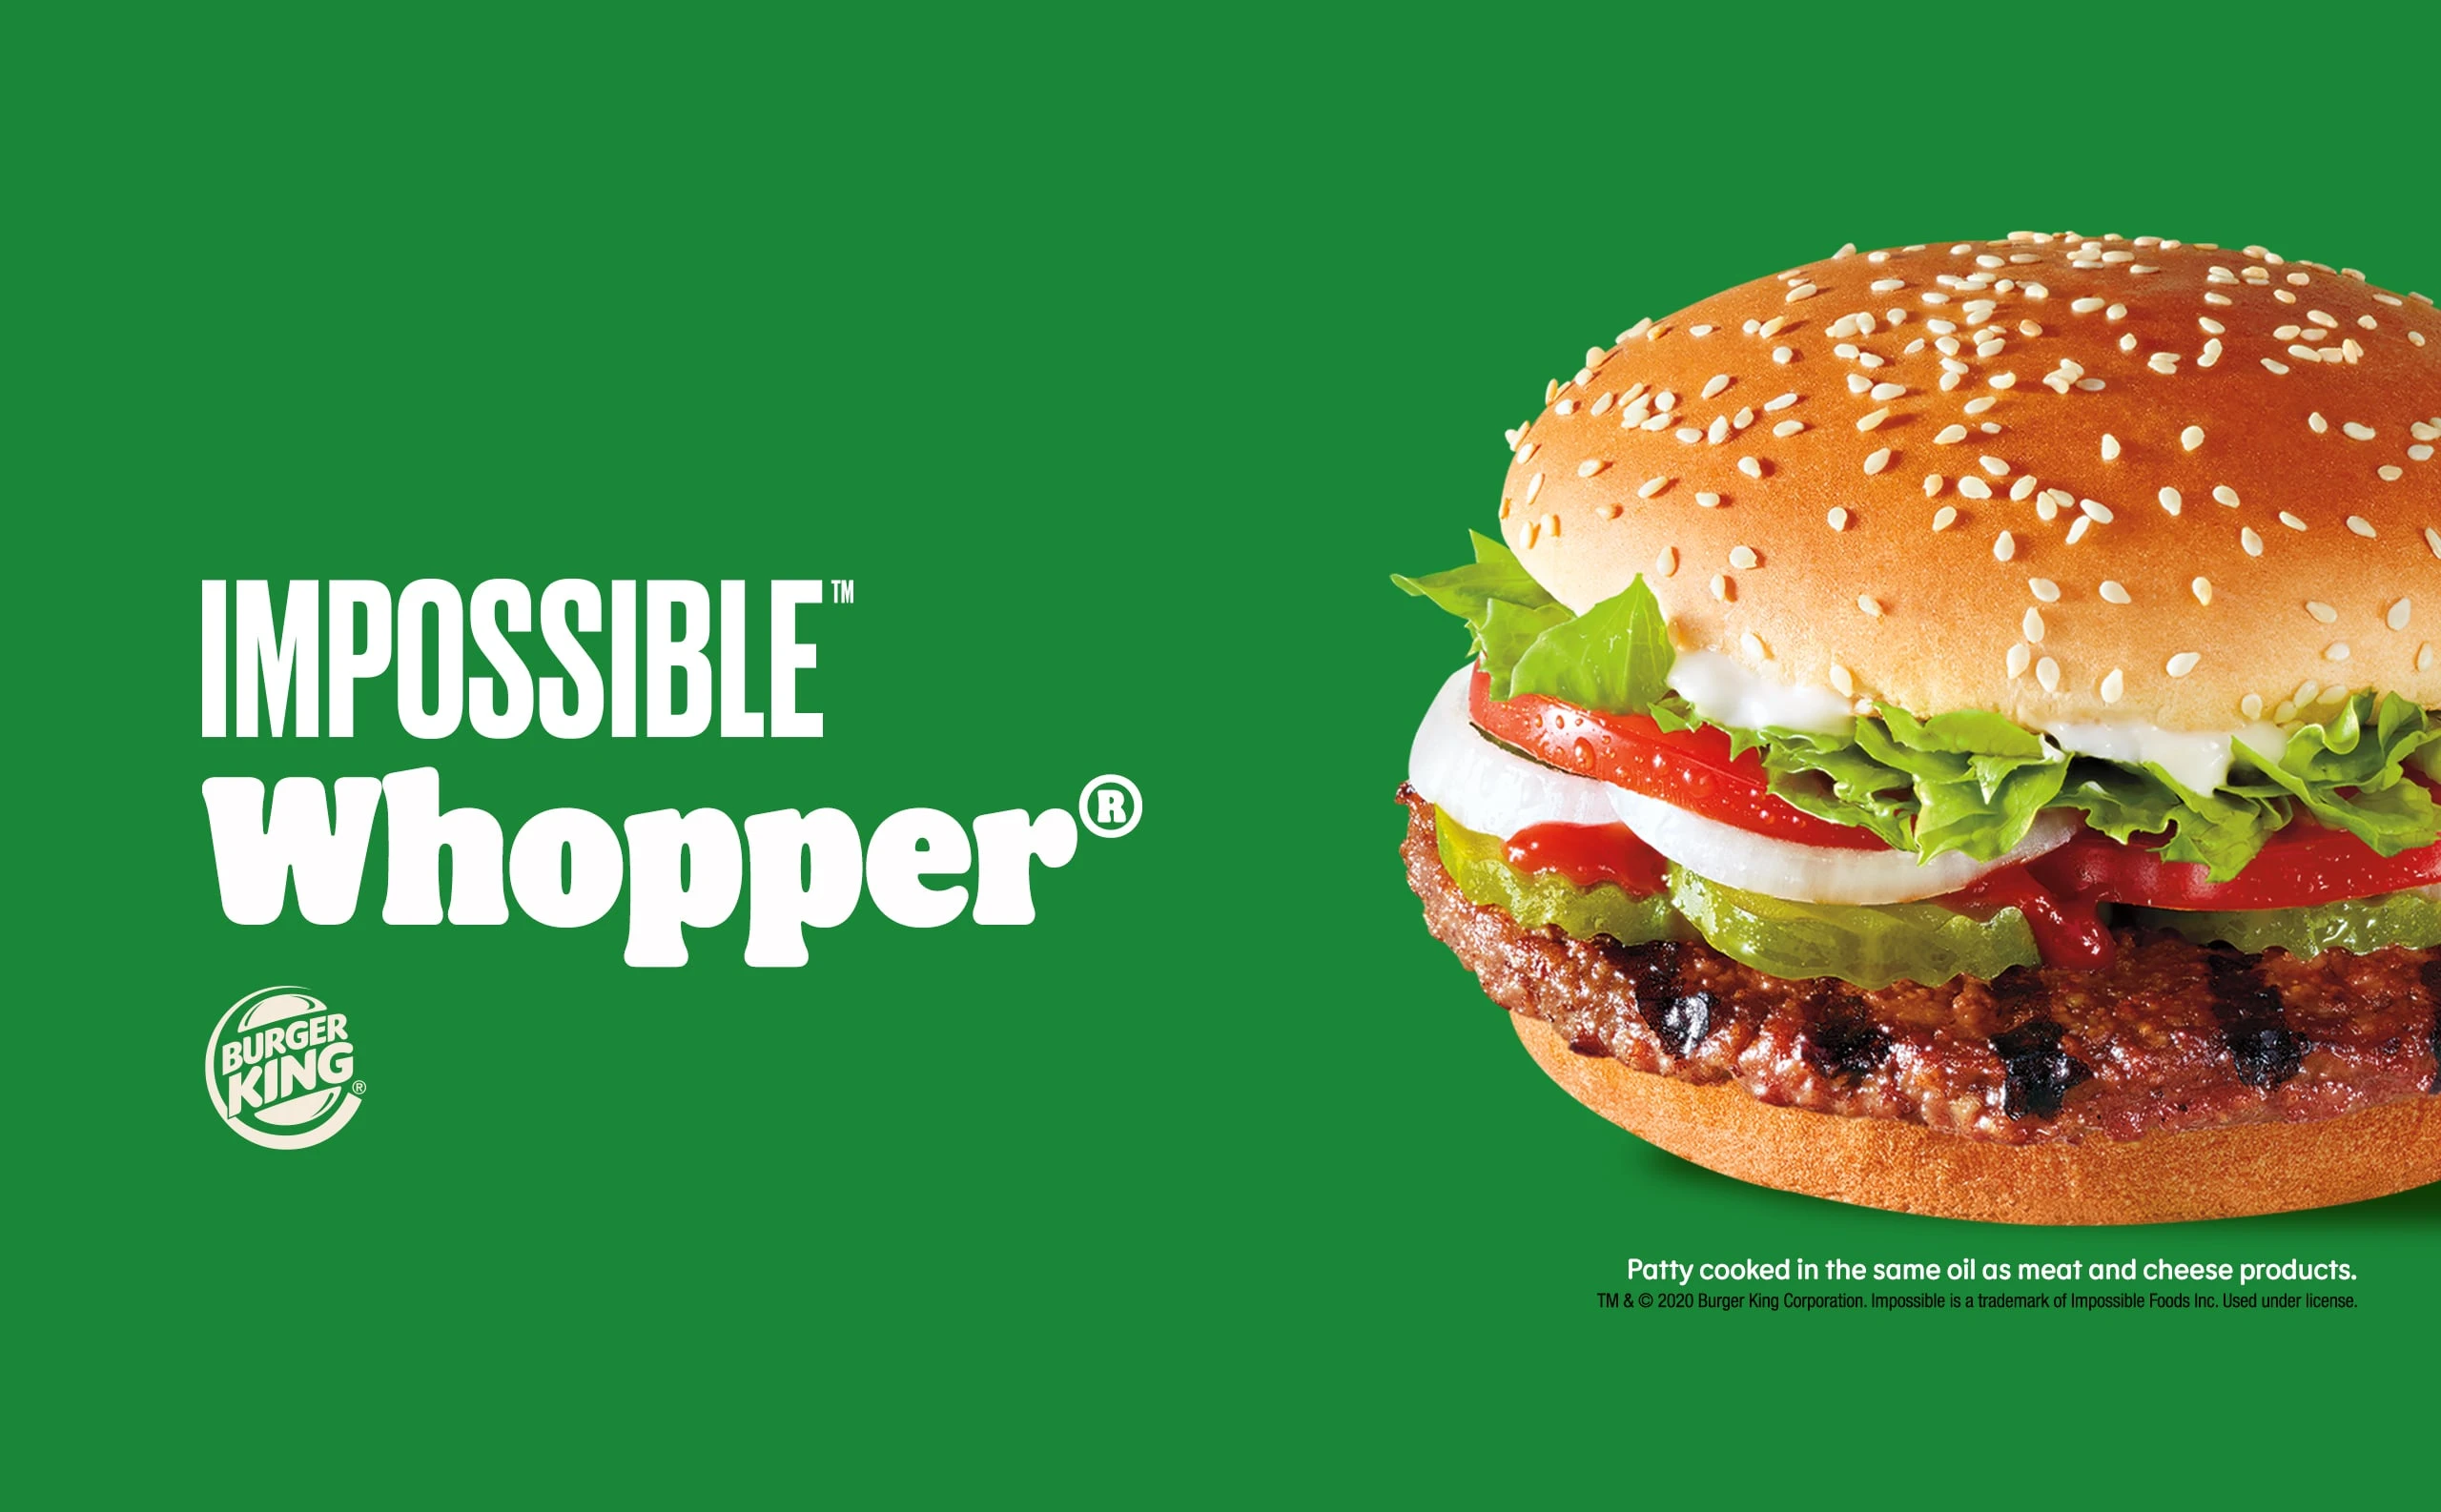 Impossible Whopper from Burger King on green background